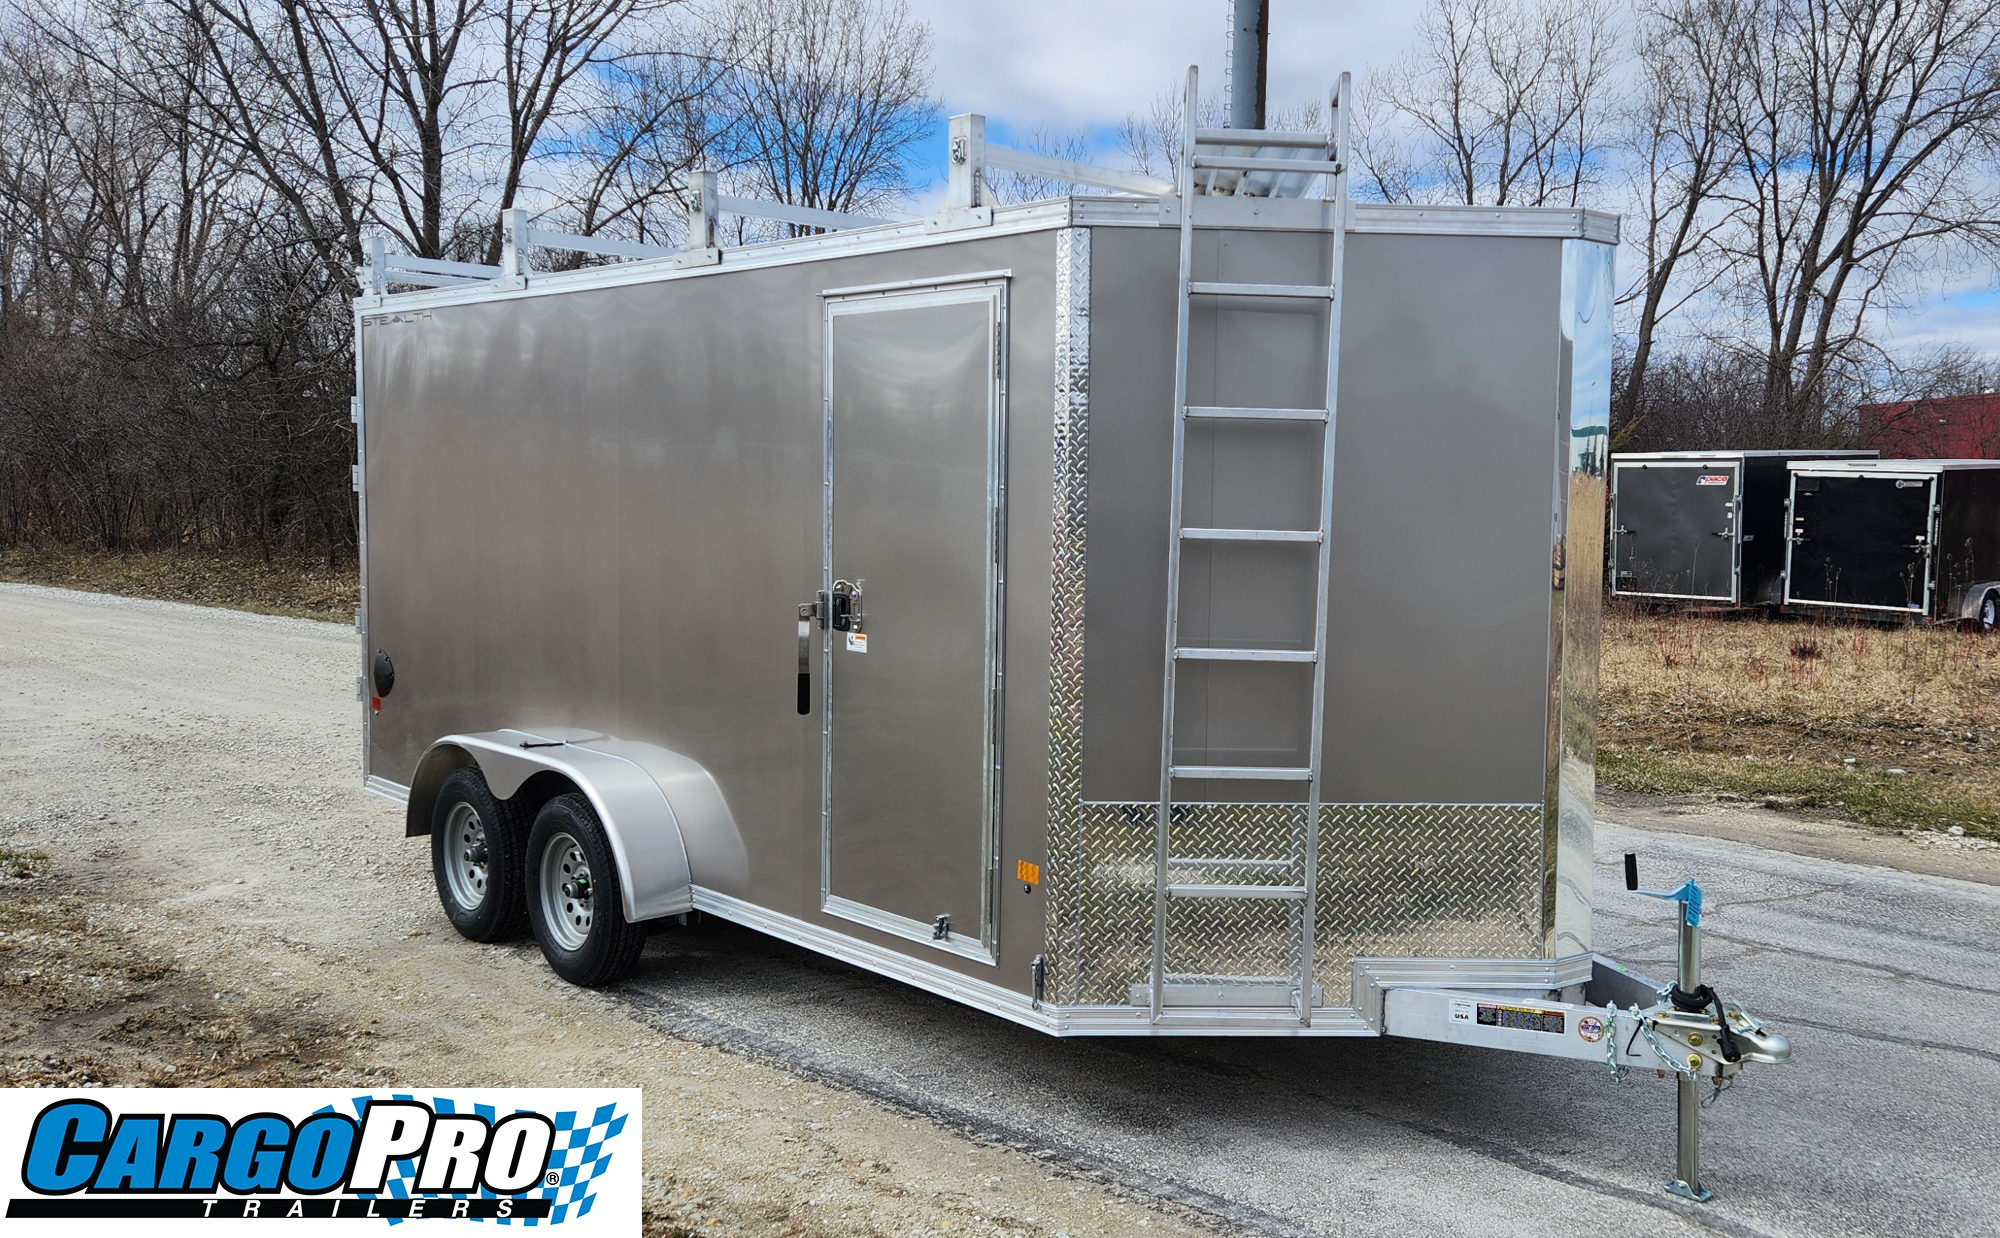 CargoPro Stealth 7 X 16 Aluminum Frame Tandem Axle Contractor Cargo Trailer Double Rear Doors, 79 inch Interior Height- Pewter